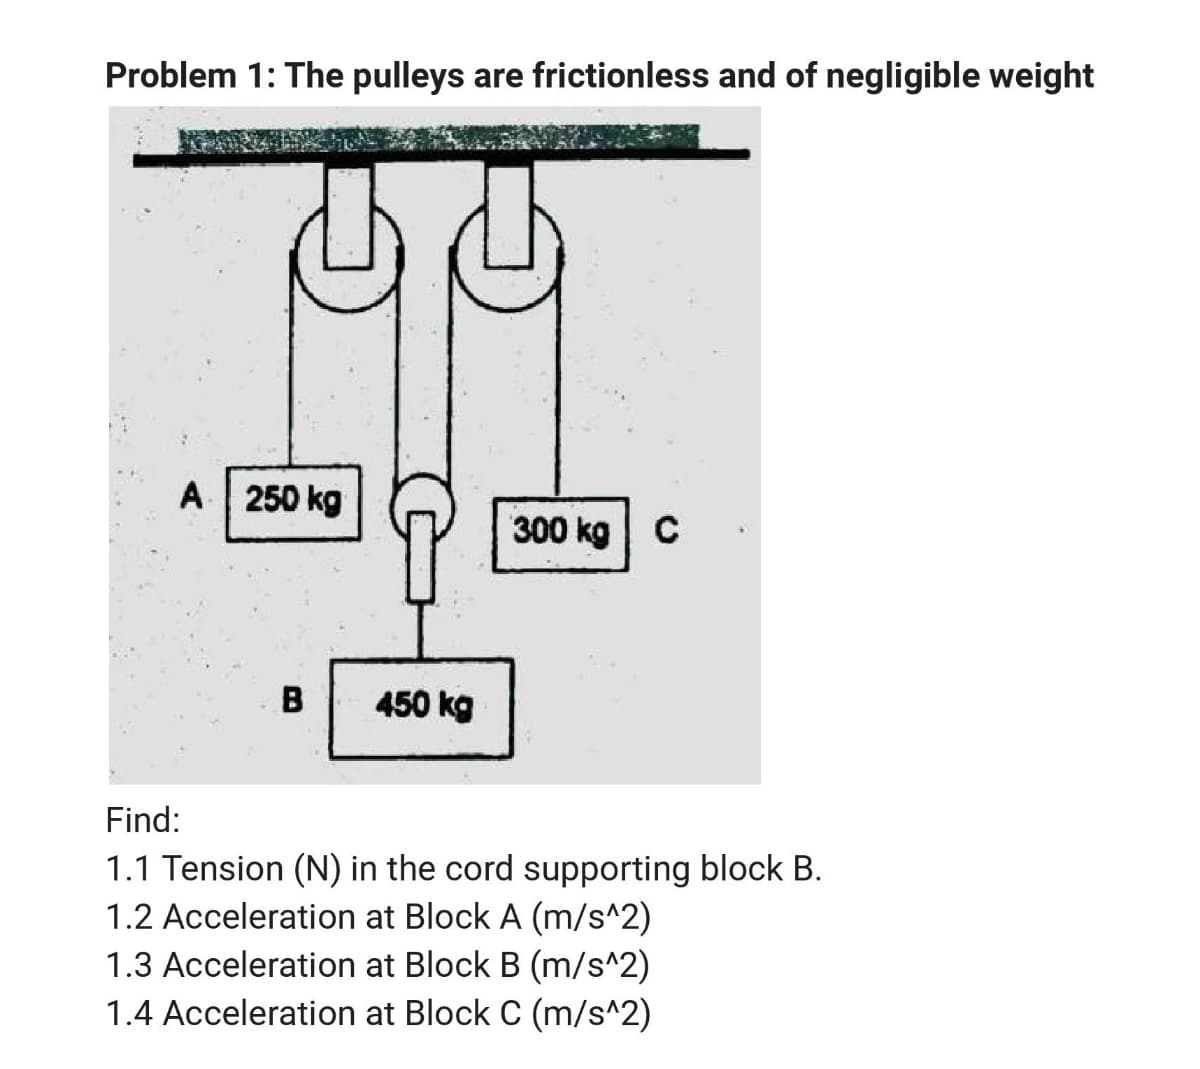 Problem 1: The pulleys are frictionless and of negligible weight
A 250 kg
300 kg
450 kg
Find:
1.1 Tension (N) in the cord supporting block B.
1.2 Acceleration at Block A (m/s^2)
1.3 Acceleration at Block B (m/s^2)
1.4 Acceleration at Block C (m/s^2)
